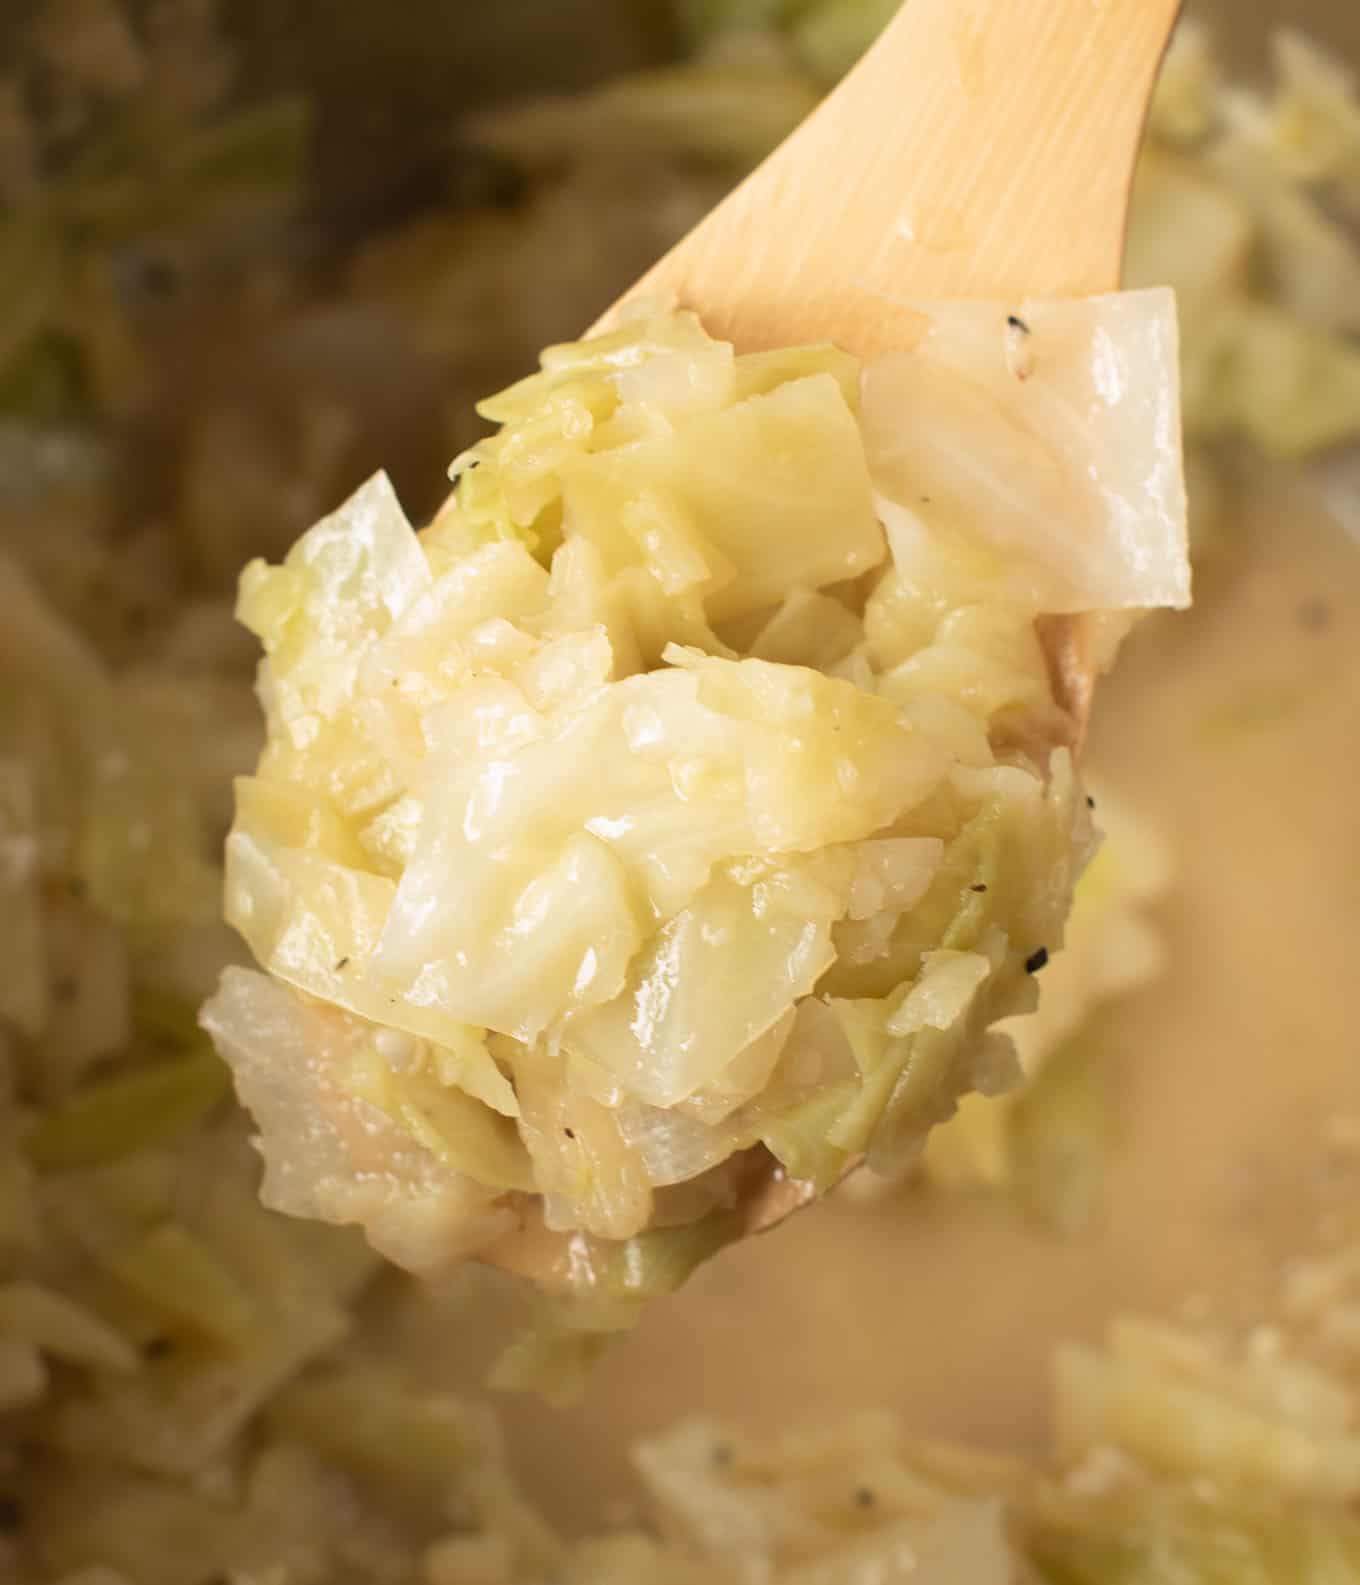 a spoon taking a scoop of buttered cabbage from the instant pot